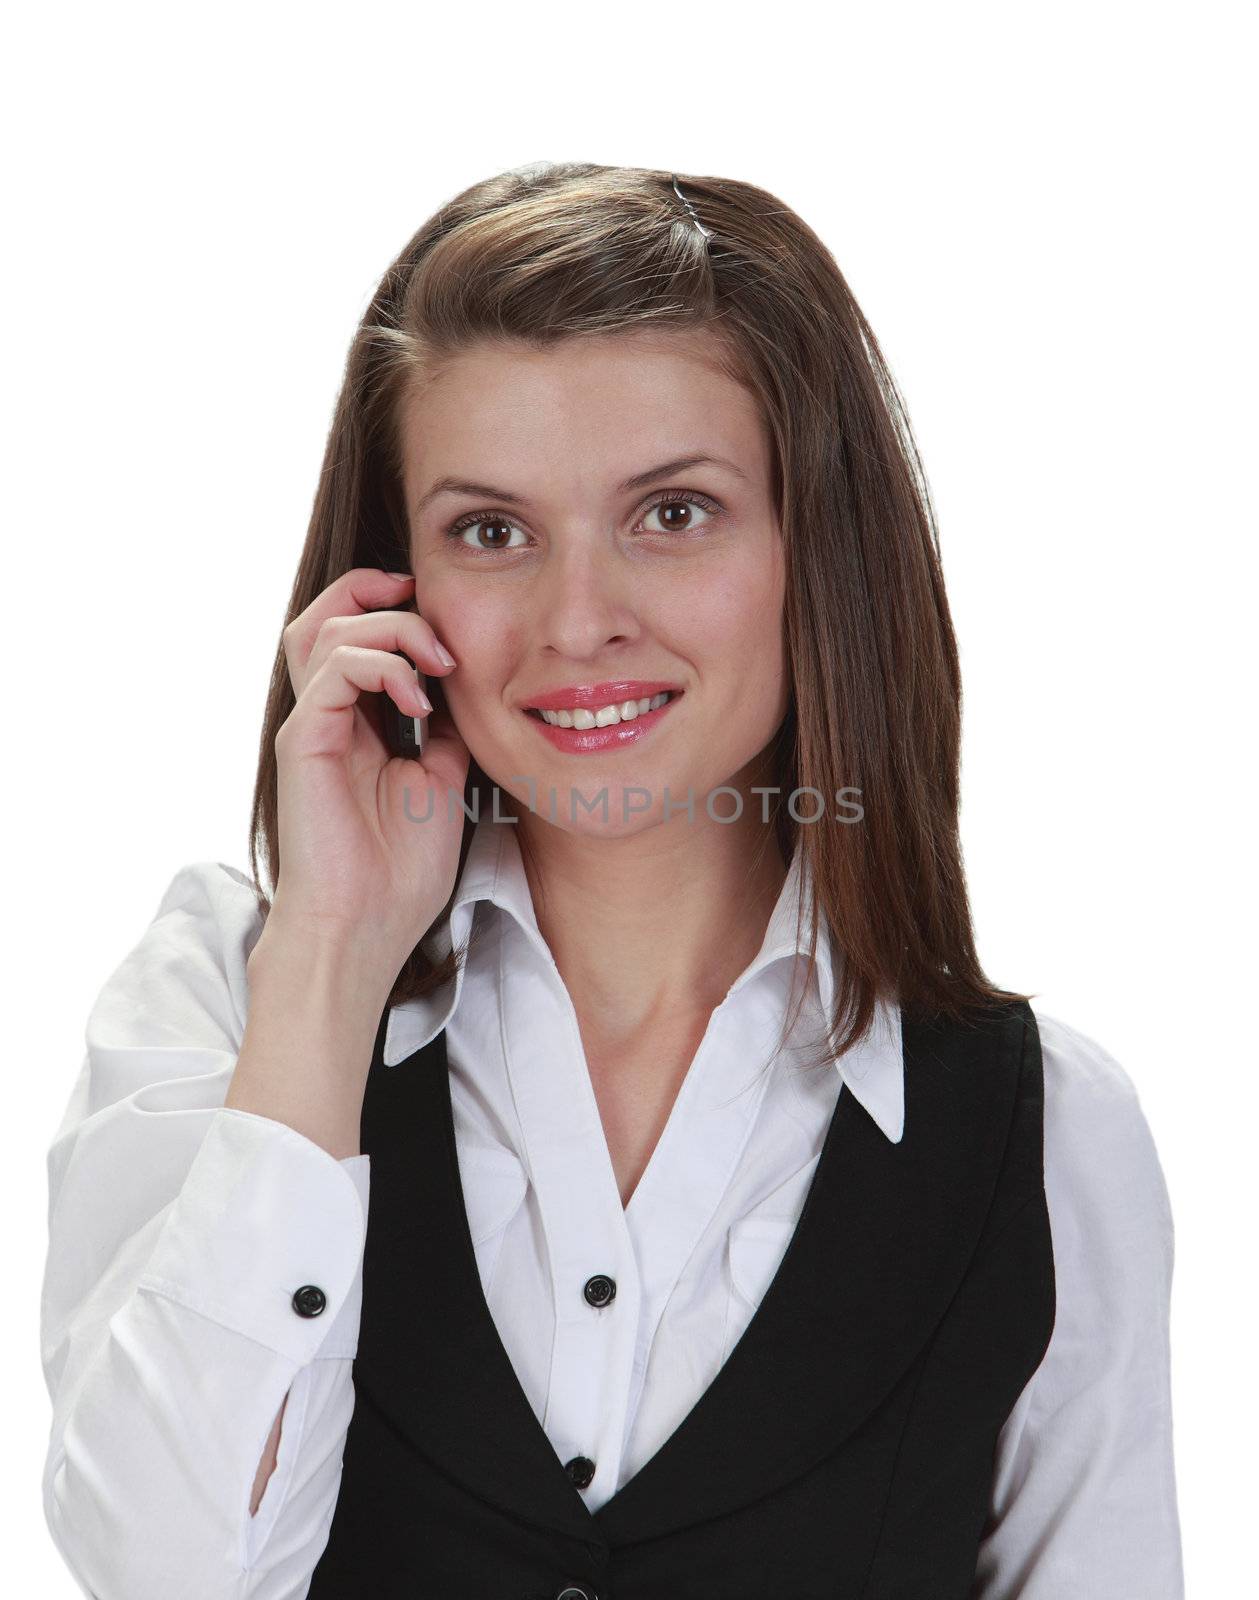 Portrait of a young woman on the phone, isolated against a white background.